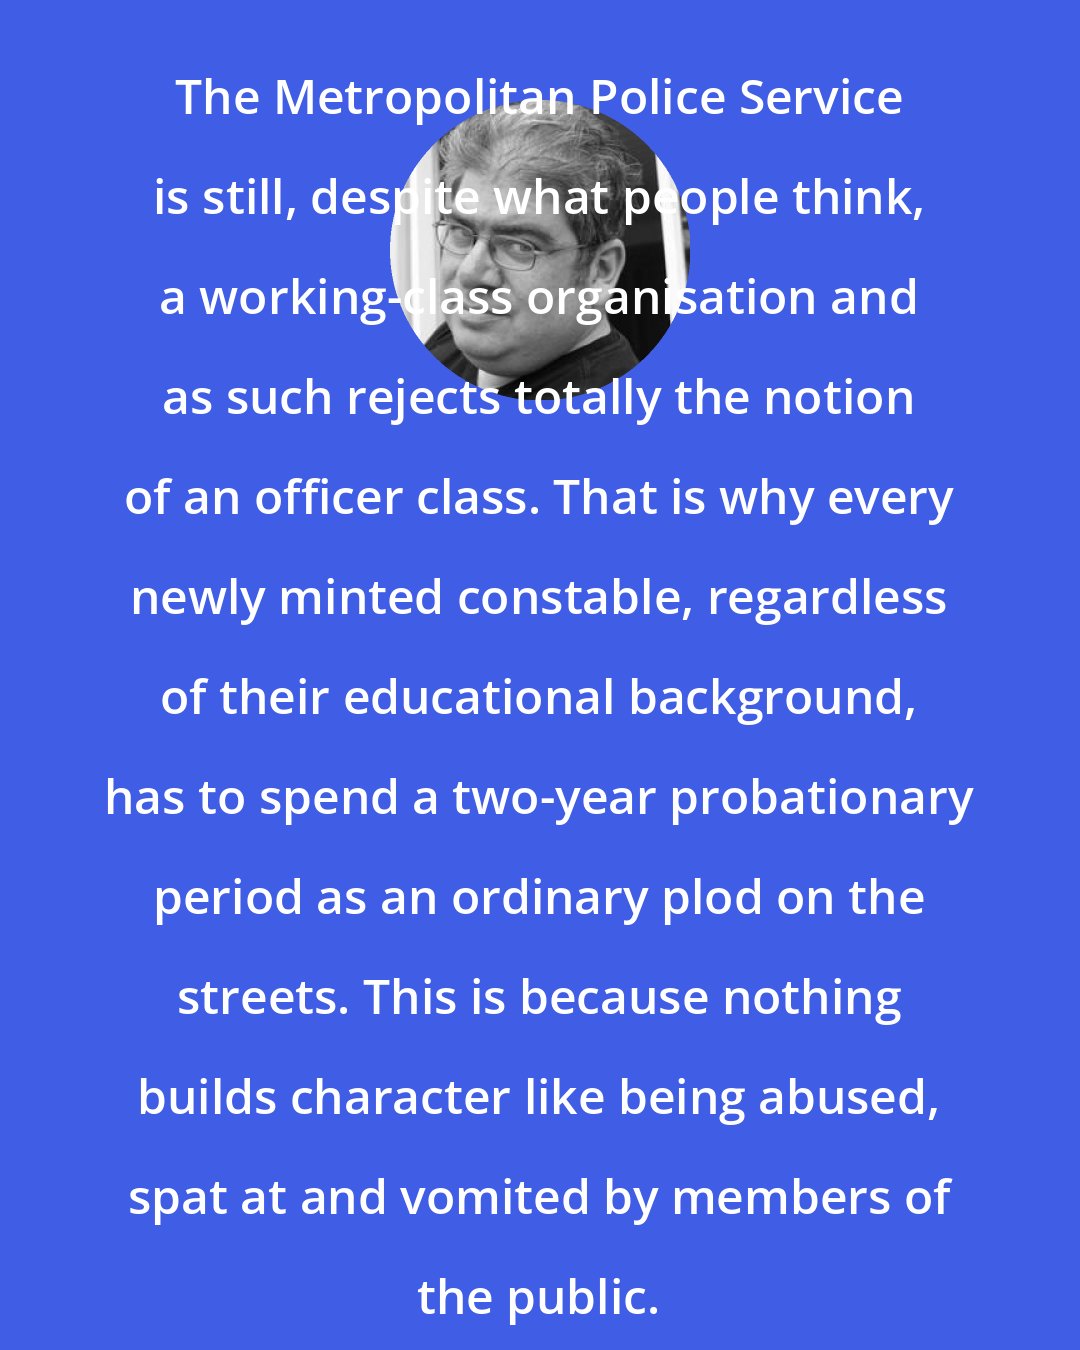 Ben Aaronovitch: The Metropolitan Police Service is still, despite what people think, a working-class organisation and as such rejects totally the notion of an officer class. That is why every newly minted constable, regardless of their educational background, has to spend a two-year probationary period as an ordinary plod on the streets. This is because nothing builds character like being abused, spat at and vomited by members of the public.